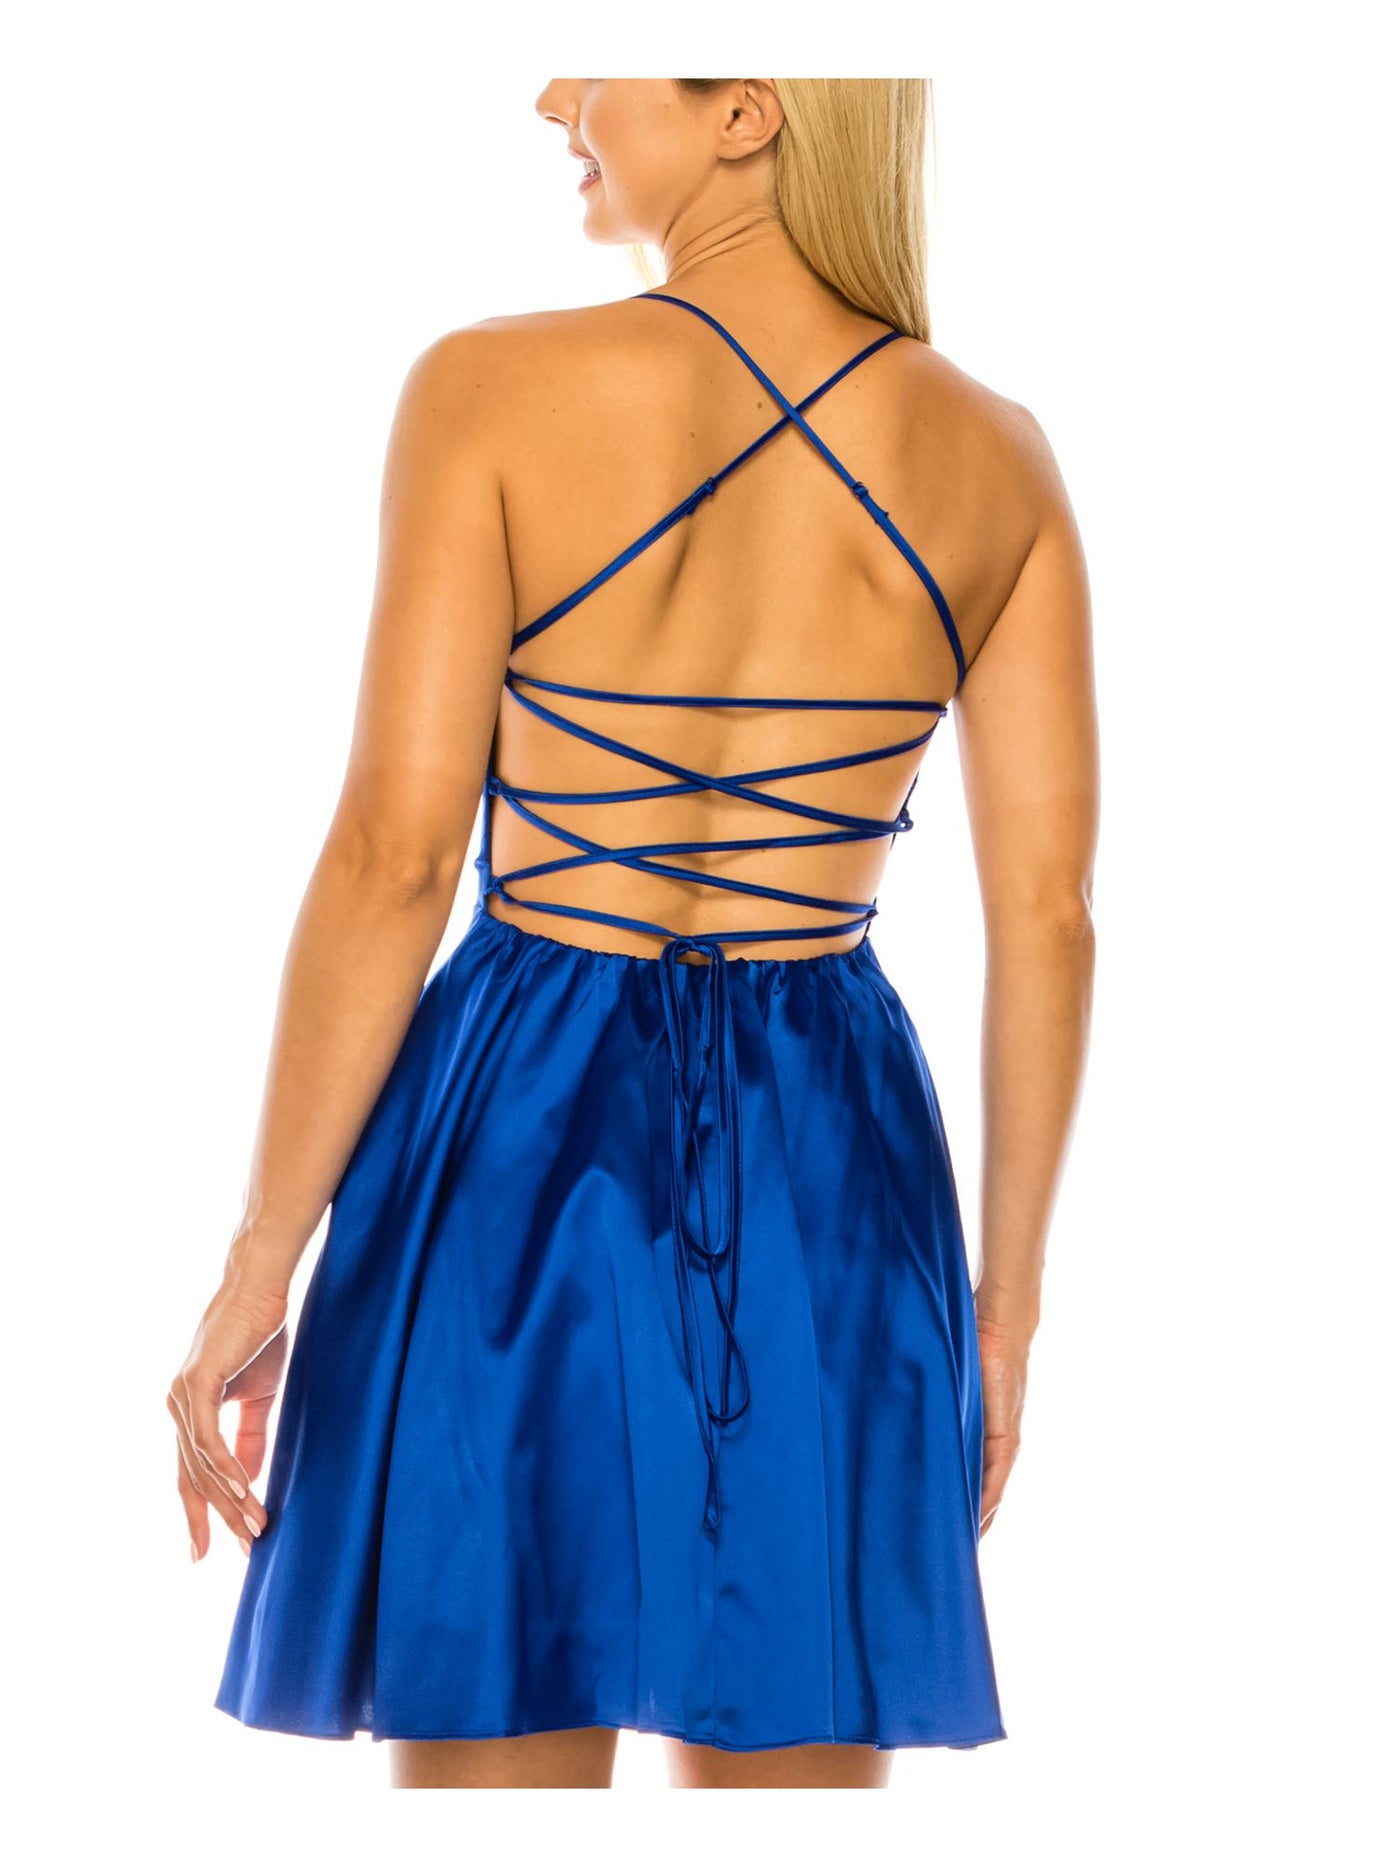 B DARLIN Womens Blue Open Back Adjustable Lined Pocketed Spaghetti Strap Square Neck Short Party A-Line Dress Juniors 1\2